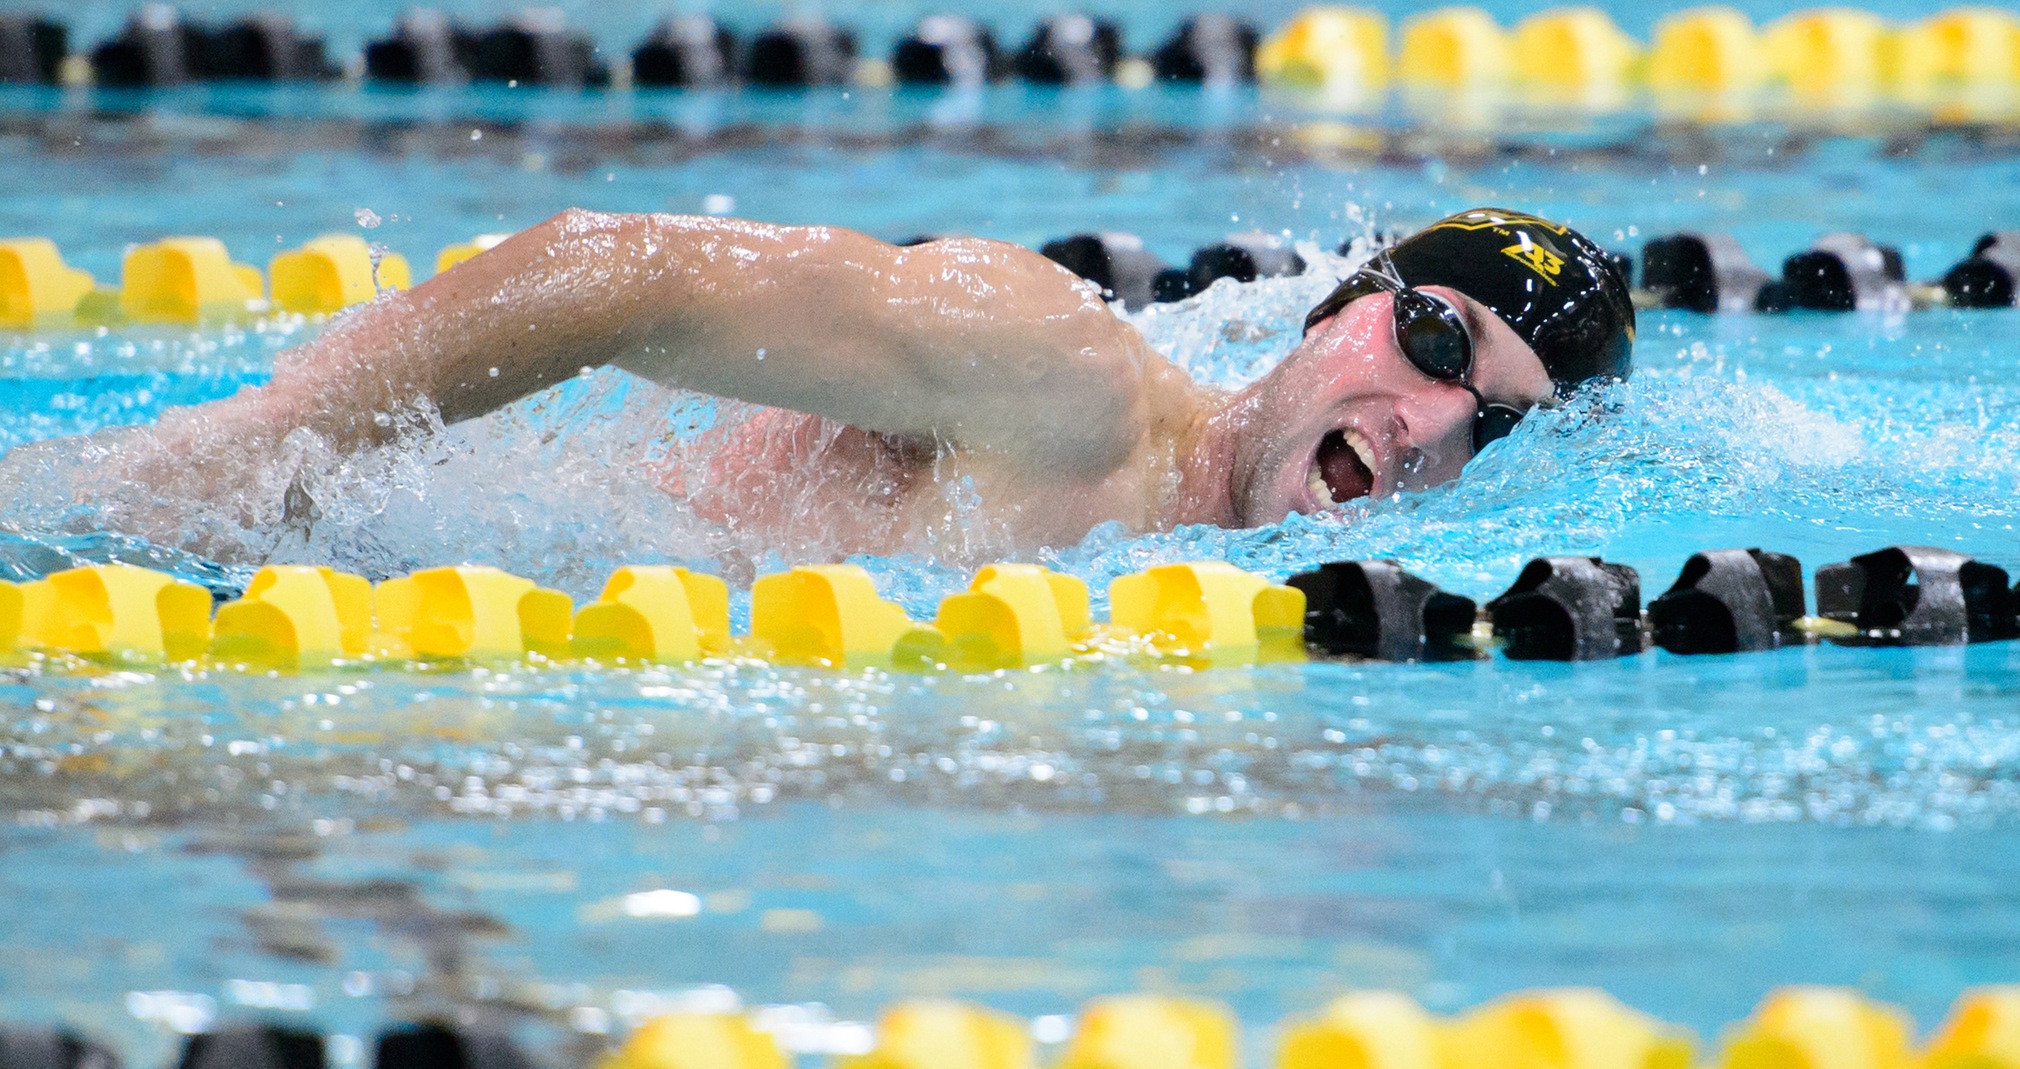 Trevor Jacobs finished third in the 100-yard freestyle and fourth in the 200-yard freestyle.